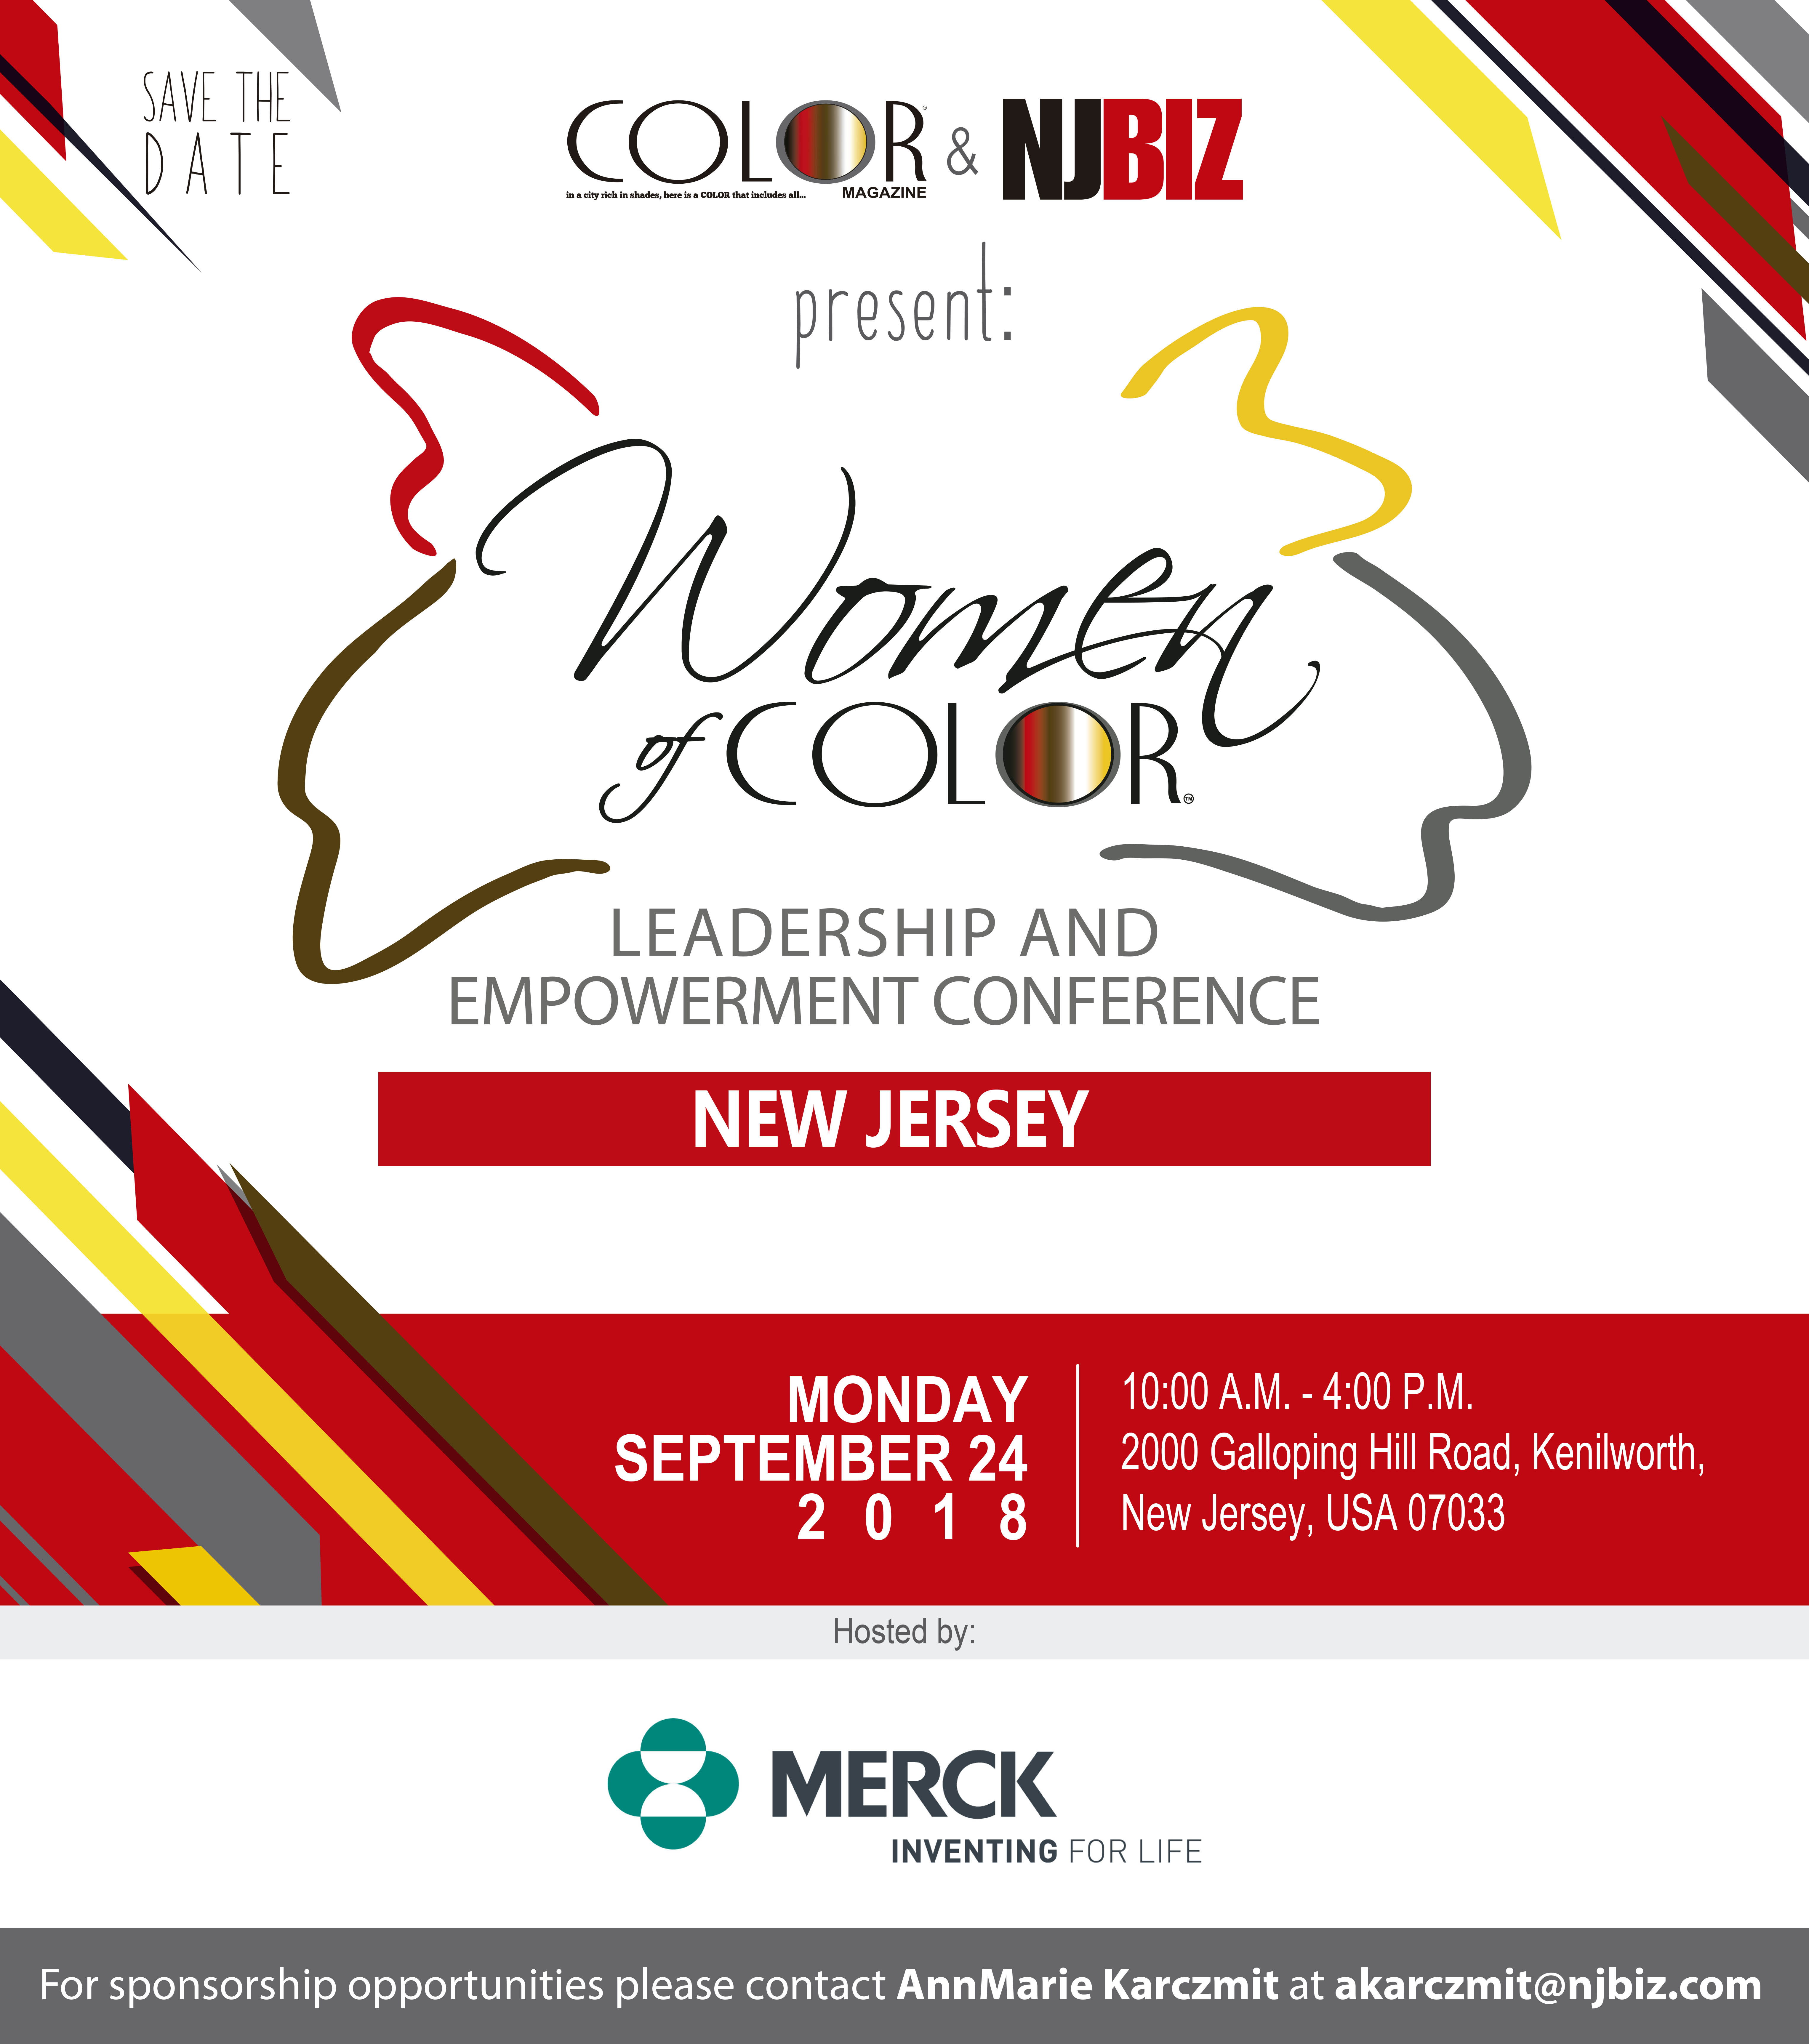 18 Recommended Pc Hardwood Floors Newark Nj 2024 free download pc hardwood floors newark nj of women of color leadership empowerment conference new jersey intended for women of color leadership empowerment conference new jersey color magazine